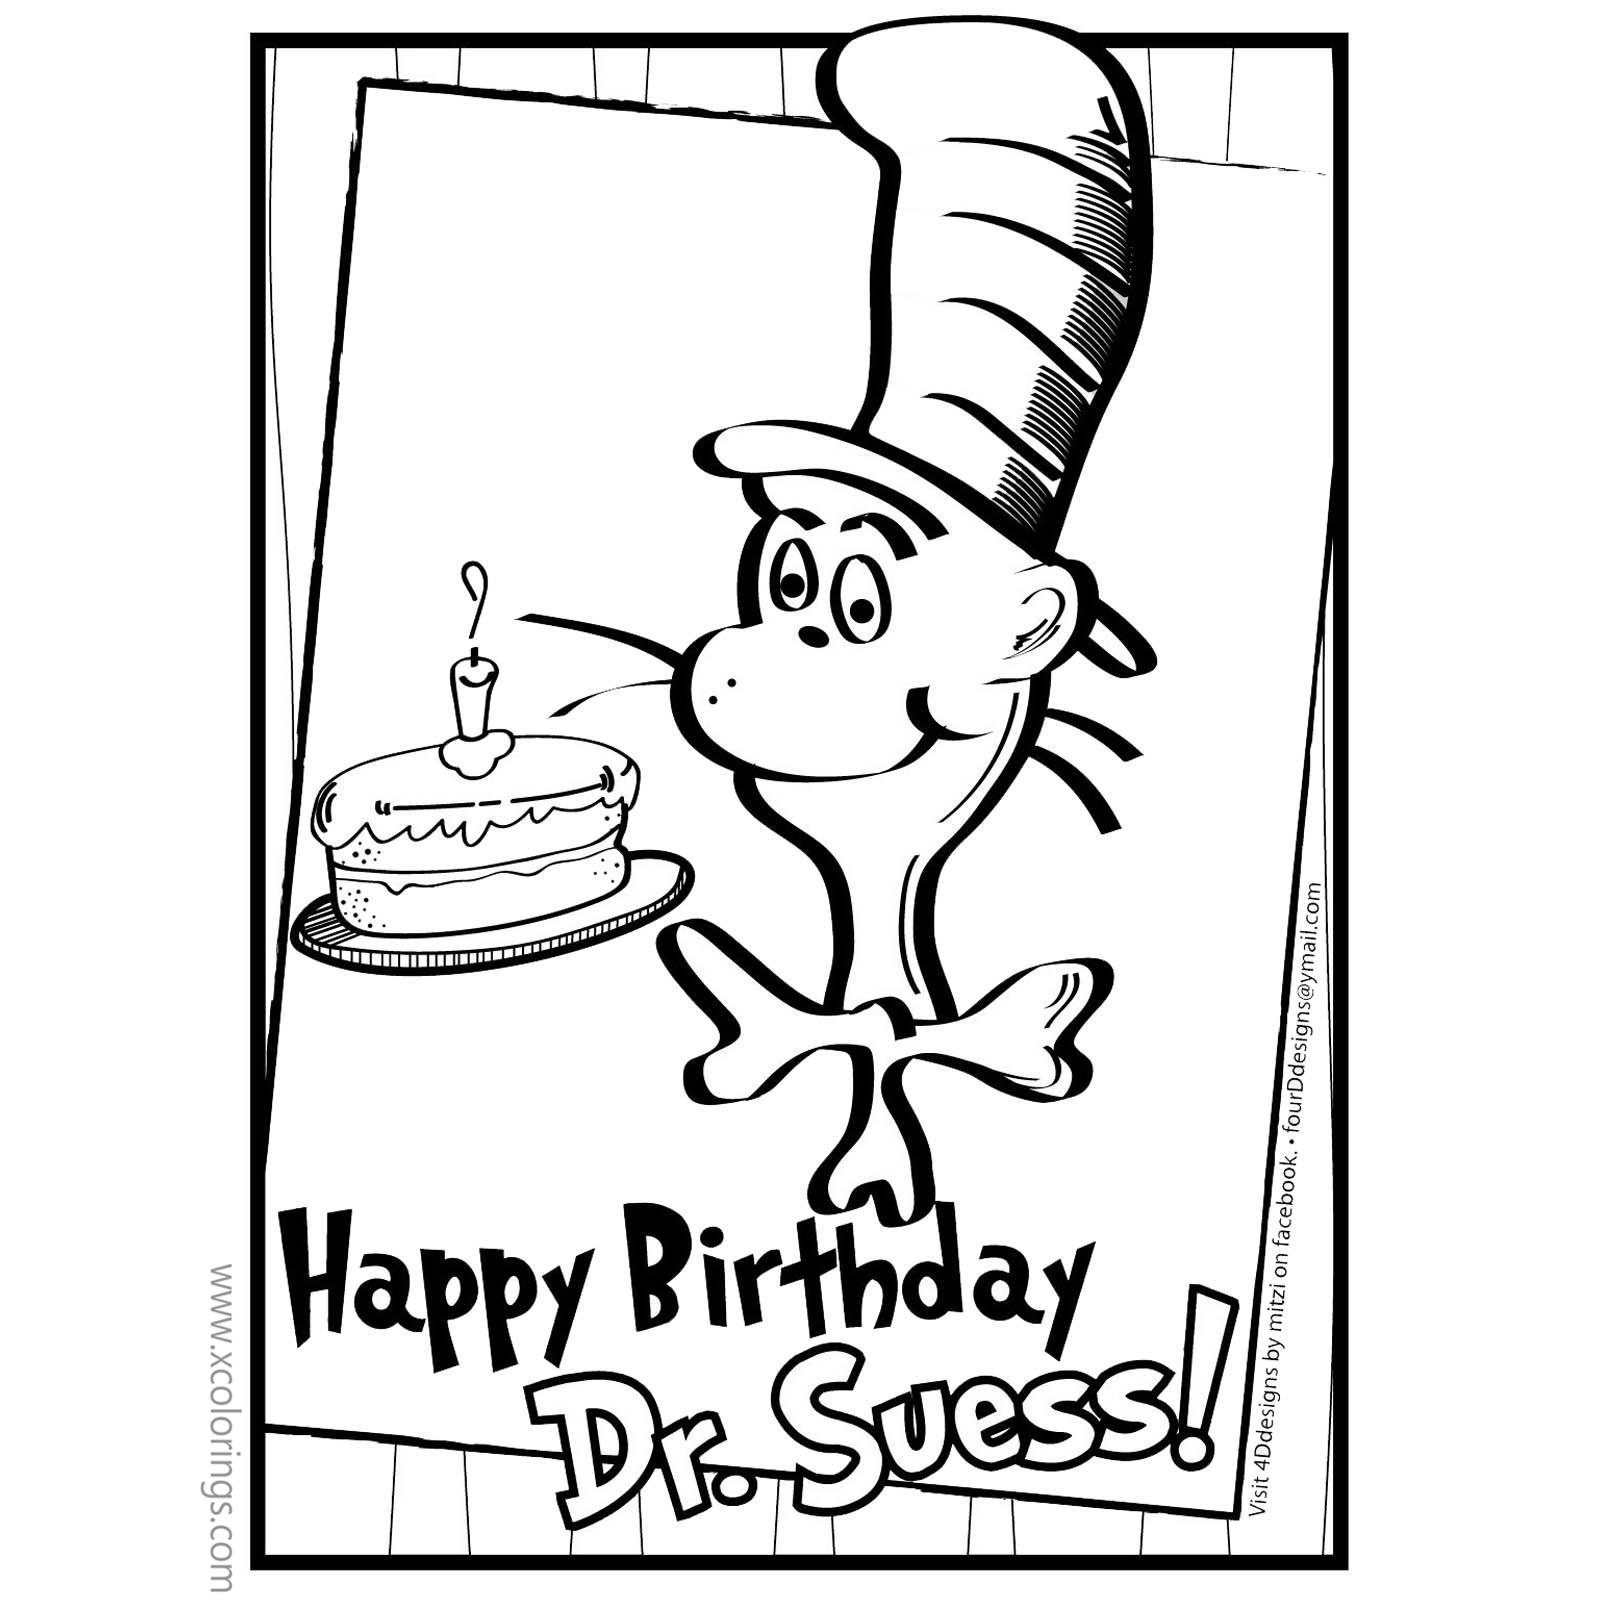 Free Happy Birthday Dr Seuss Coloring Pages for Celebration printable